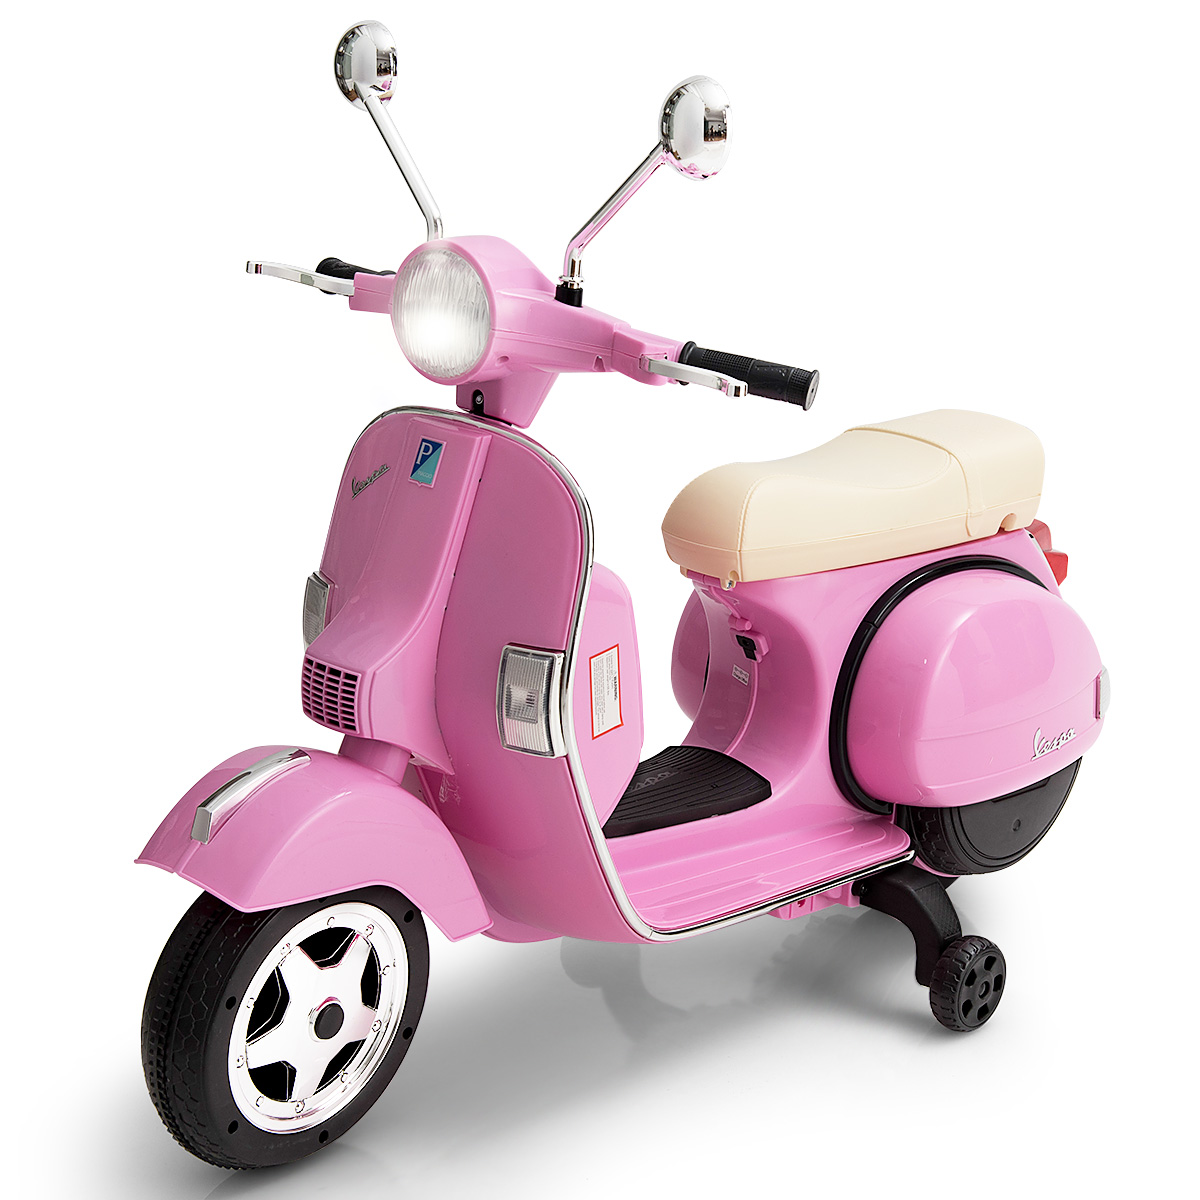 Costway Kids Vespa Scooter, 6V Rechargeable Ride on Motorcycle w/Training Wheels Pink - image 1 of 9